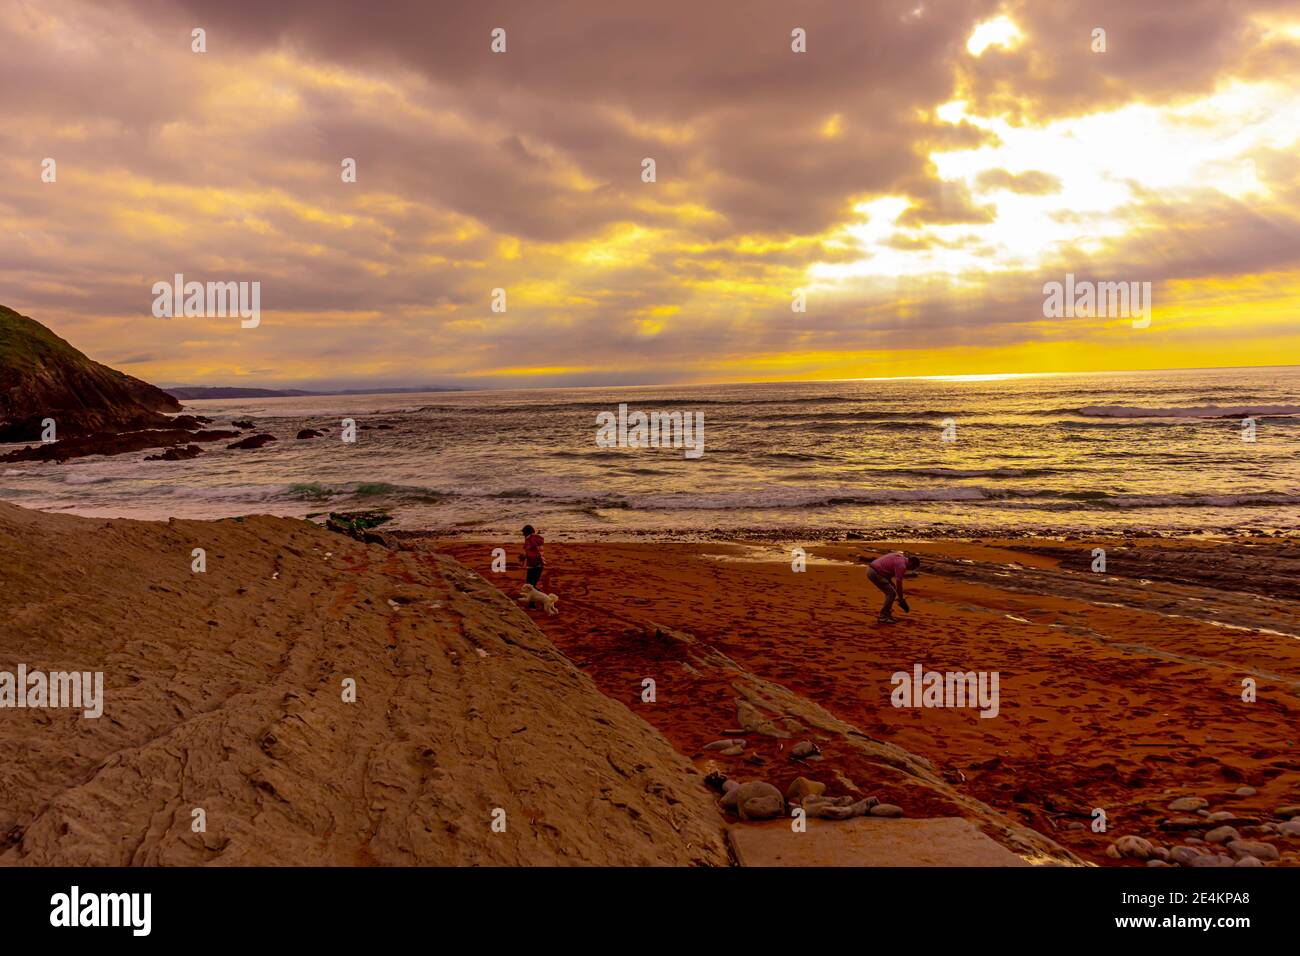 SUANCES, SPAIN - Jan 19, 2021: people on the beach watching the sunrise and water Stock Photo